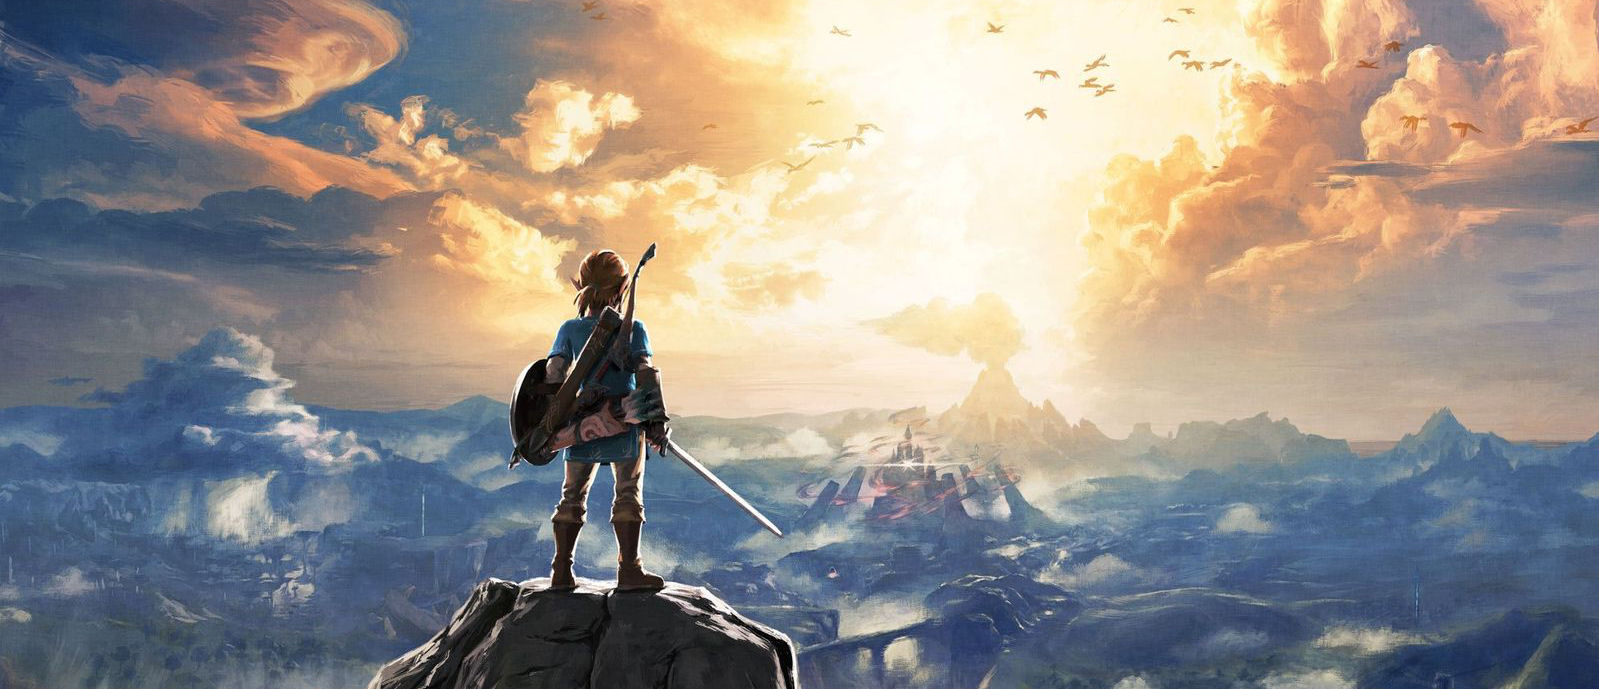 The Legend of Zelda Breath of the Wild guide and secrets